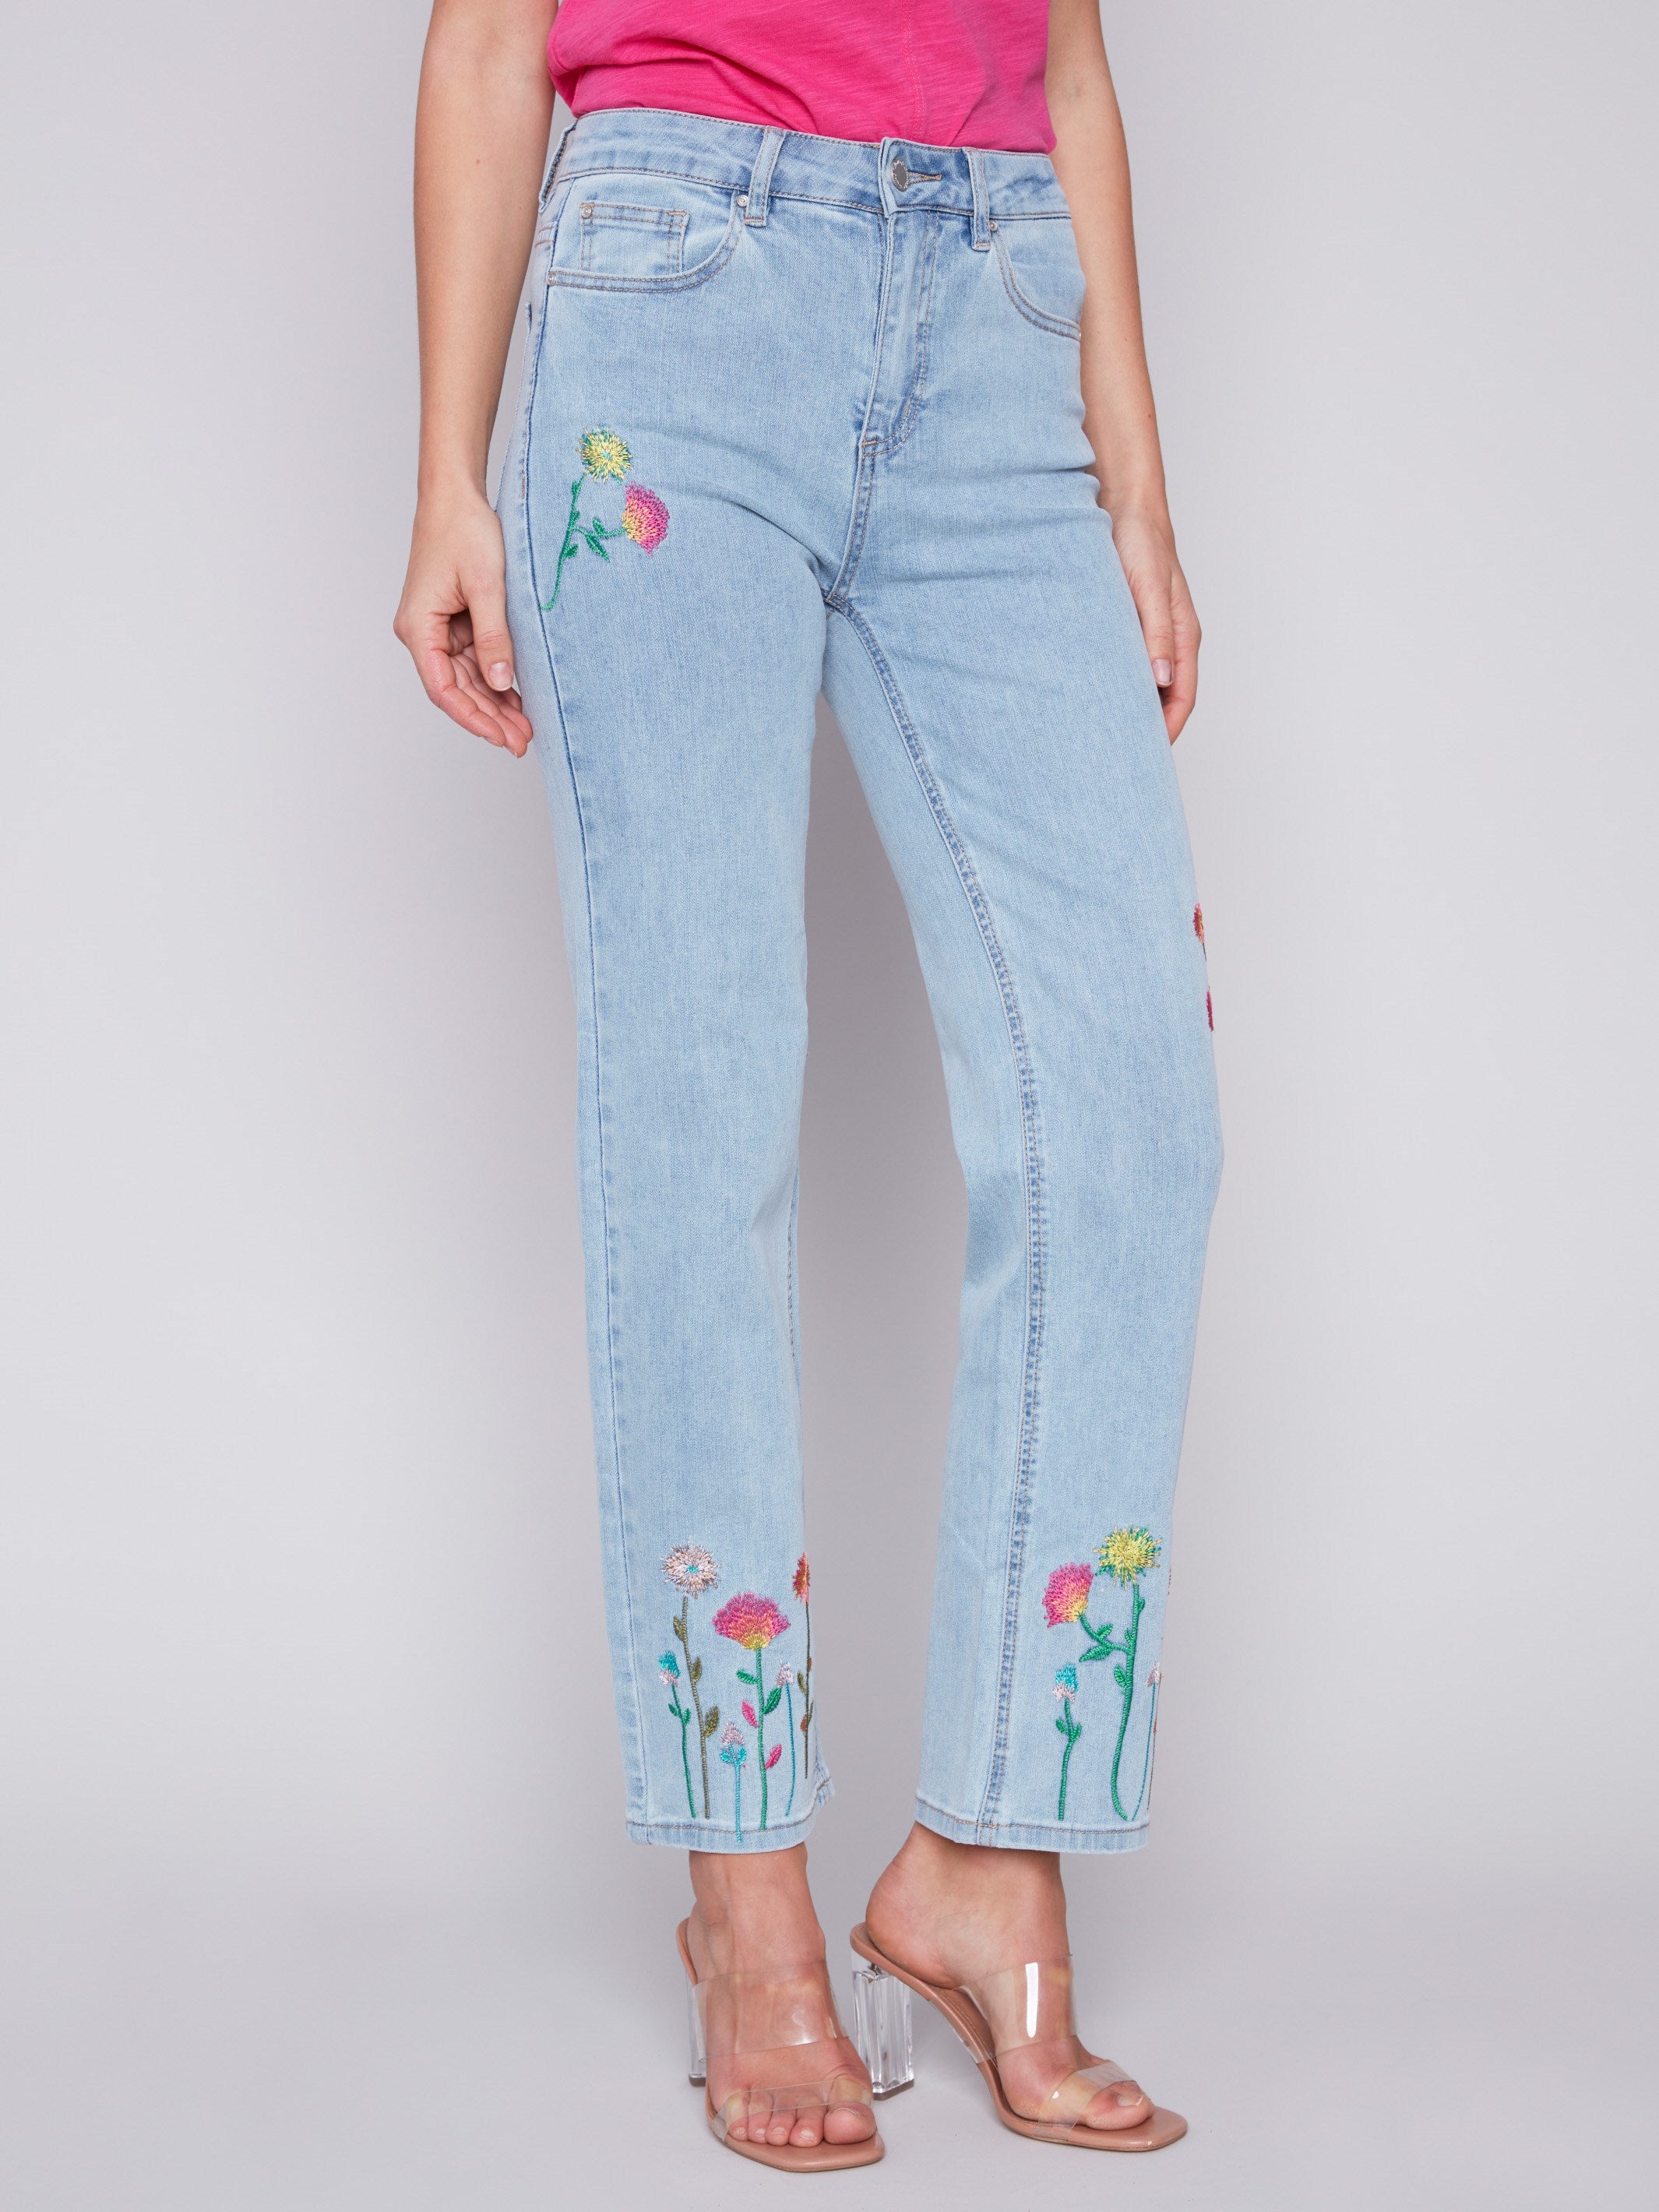 Floral Embroidered Jeans - Bleach Blue - Charlie B Collection Canada - Image 8